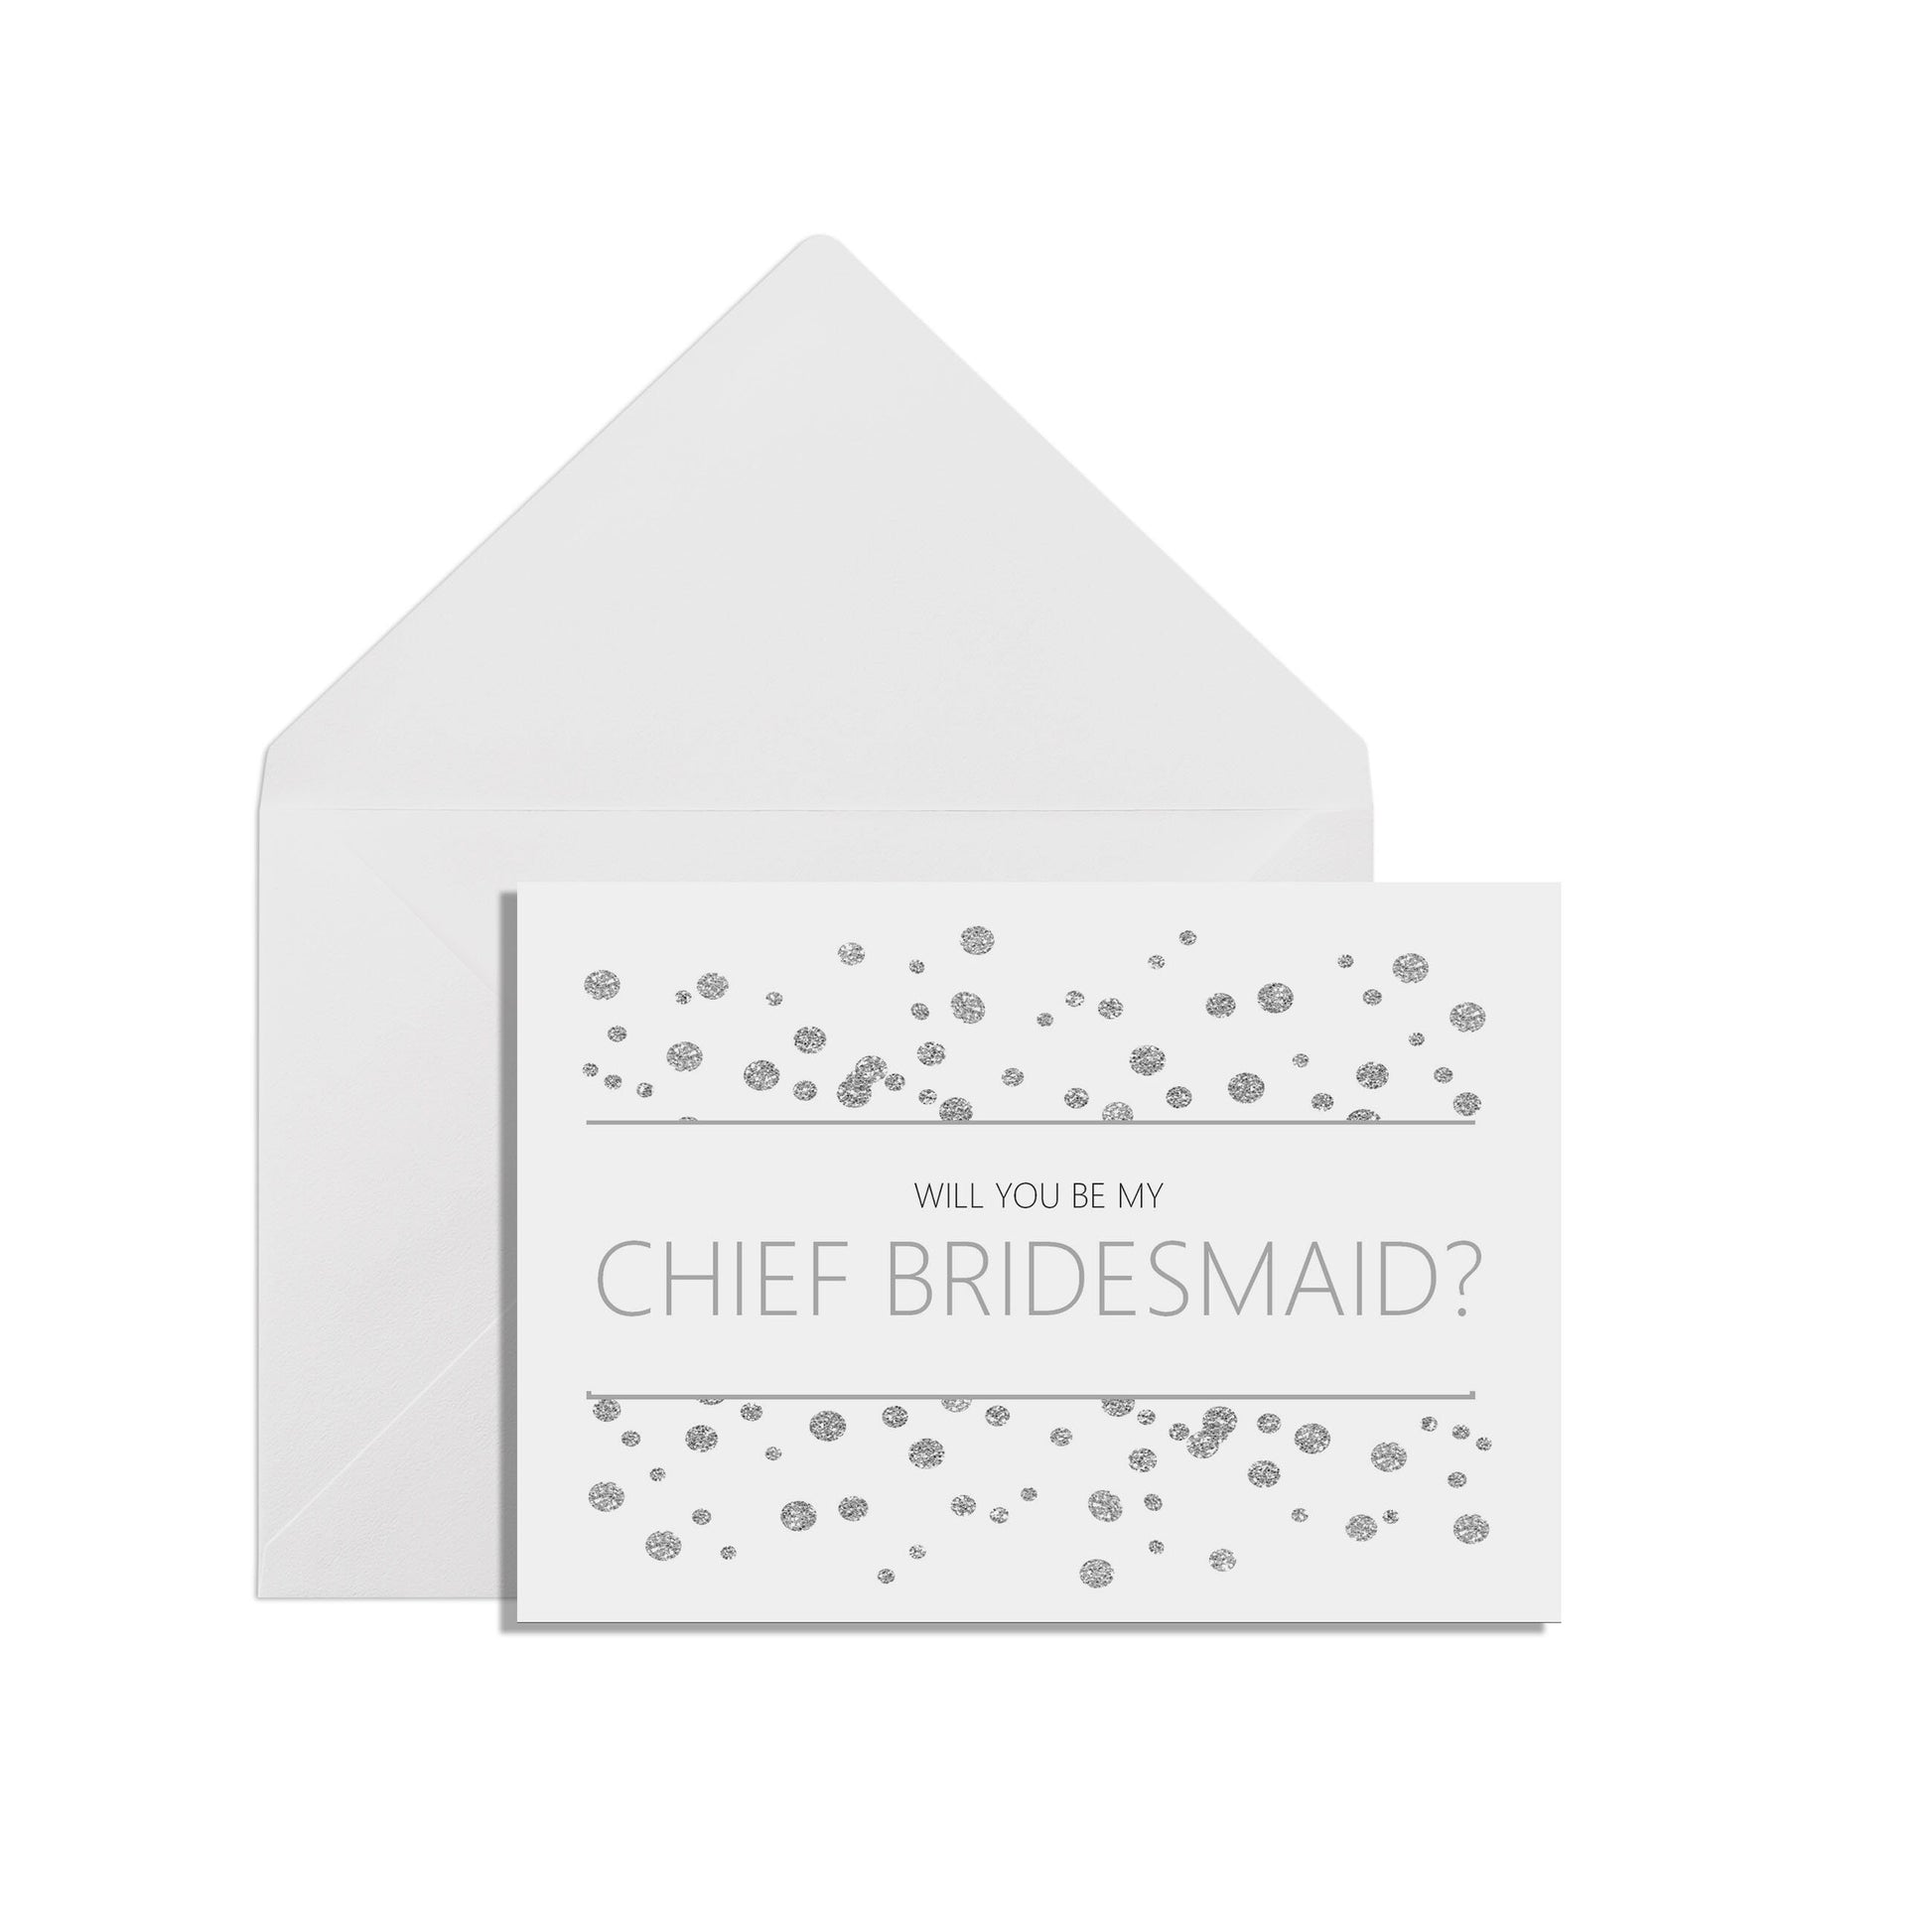 Will You Be My Chief Bridesmaid? Wedding Proposal Cards A6 Silver Effect With White Envelope